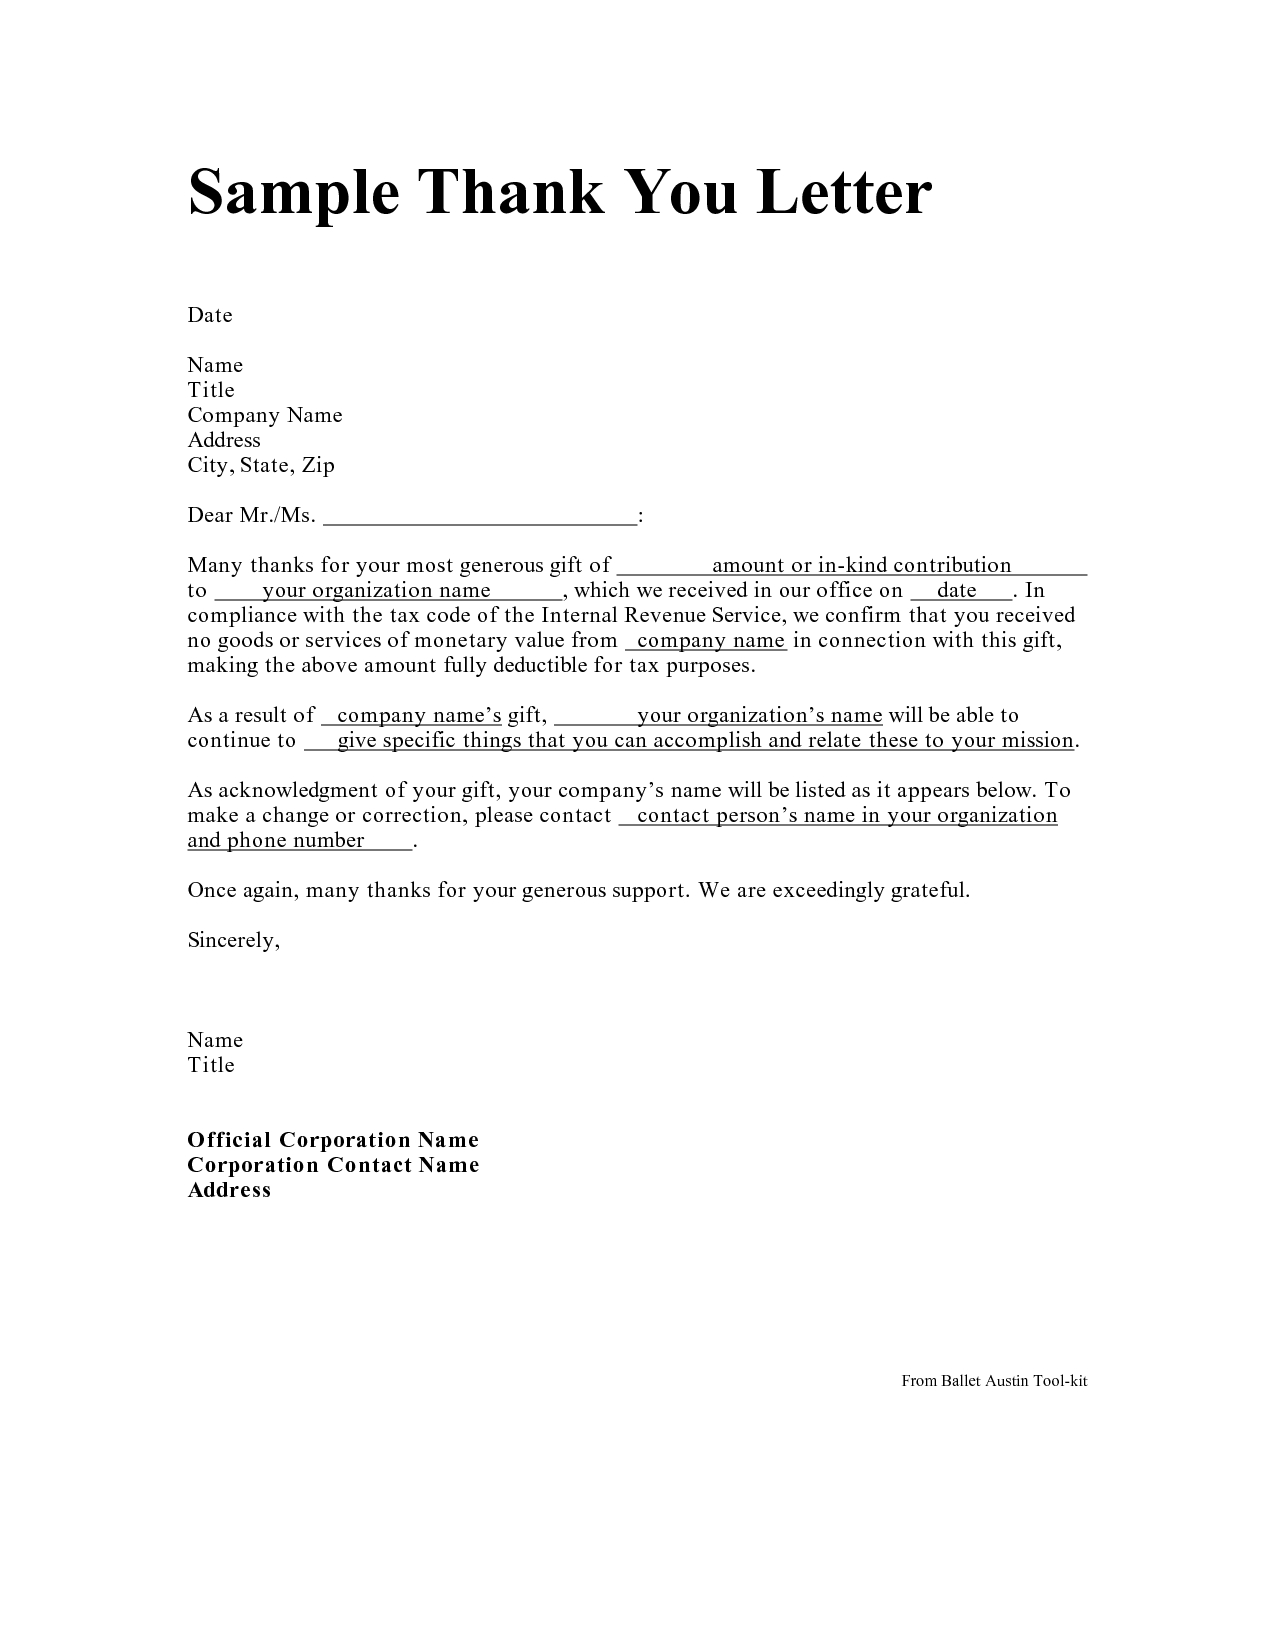 Sponsorship Thank You Letter Template - Personal Thank You Letter Personal Thank You Letter Samples